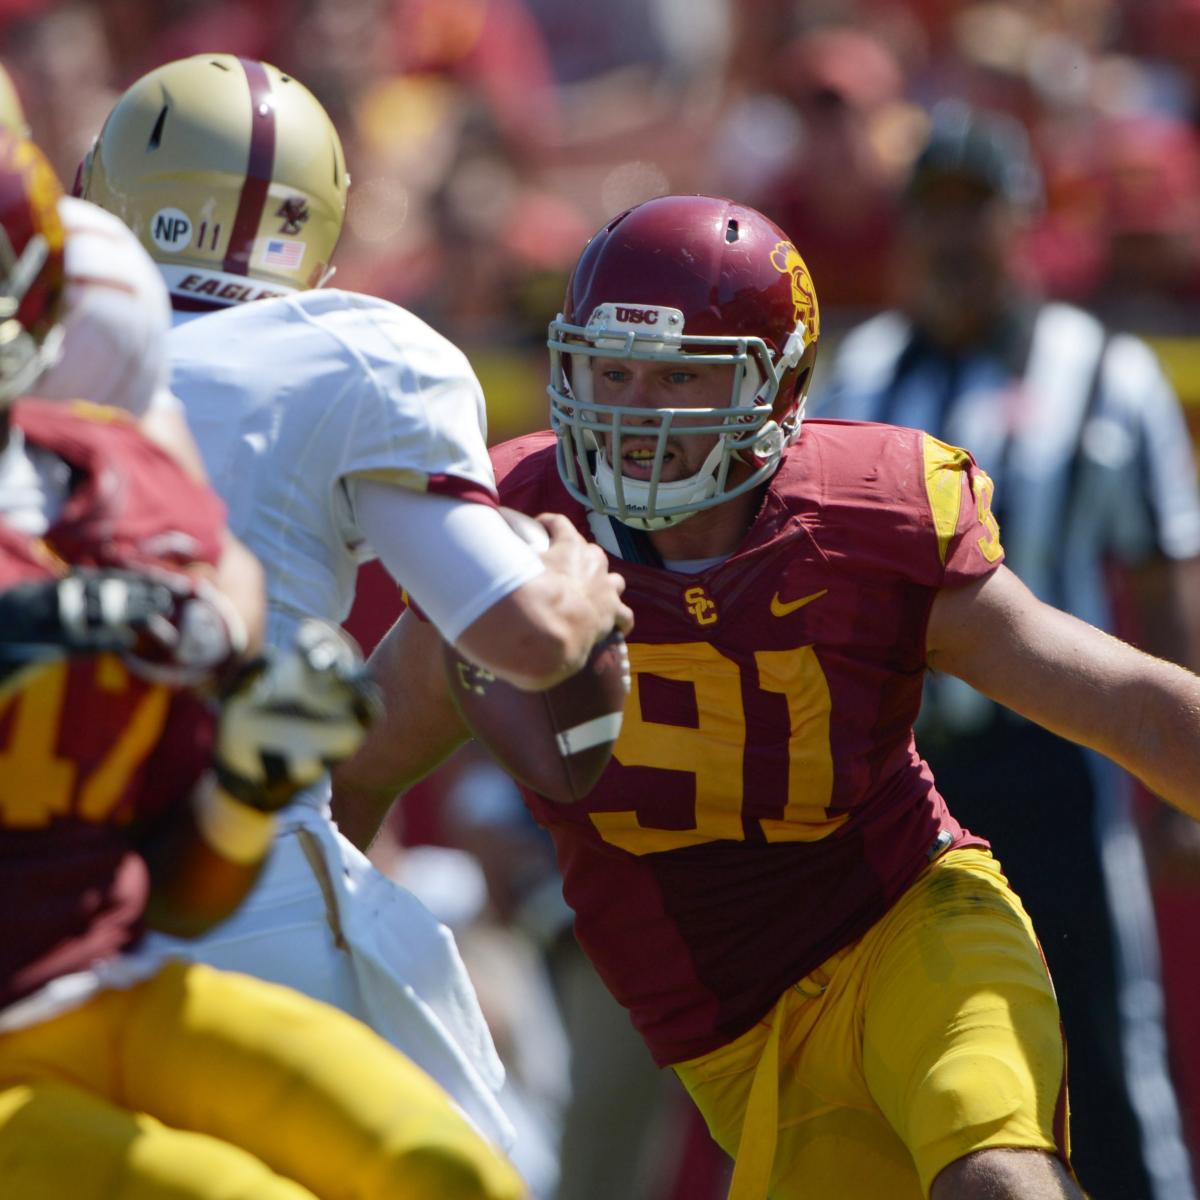 USC Football: Now with Defensive Issues, Trojans Are in Big Trouble | Bleacher Report | Latest